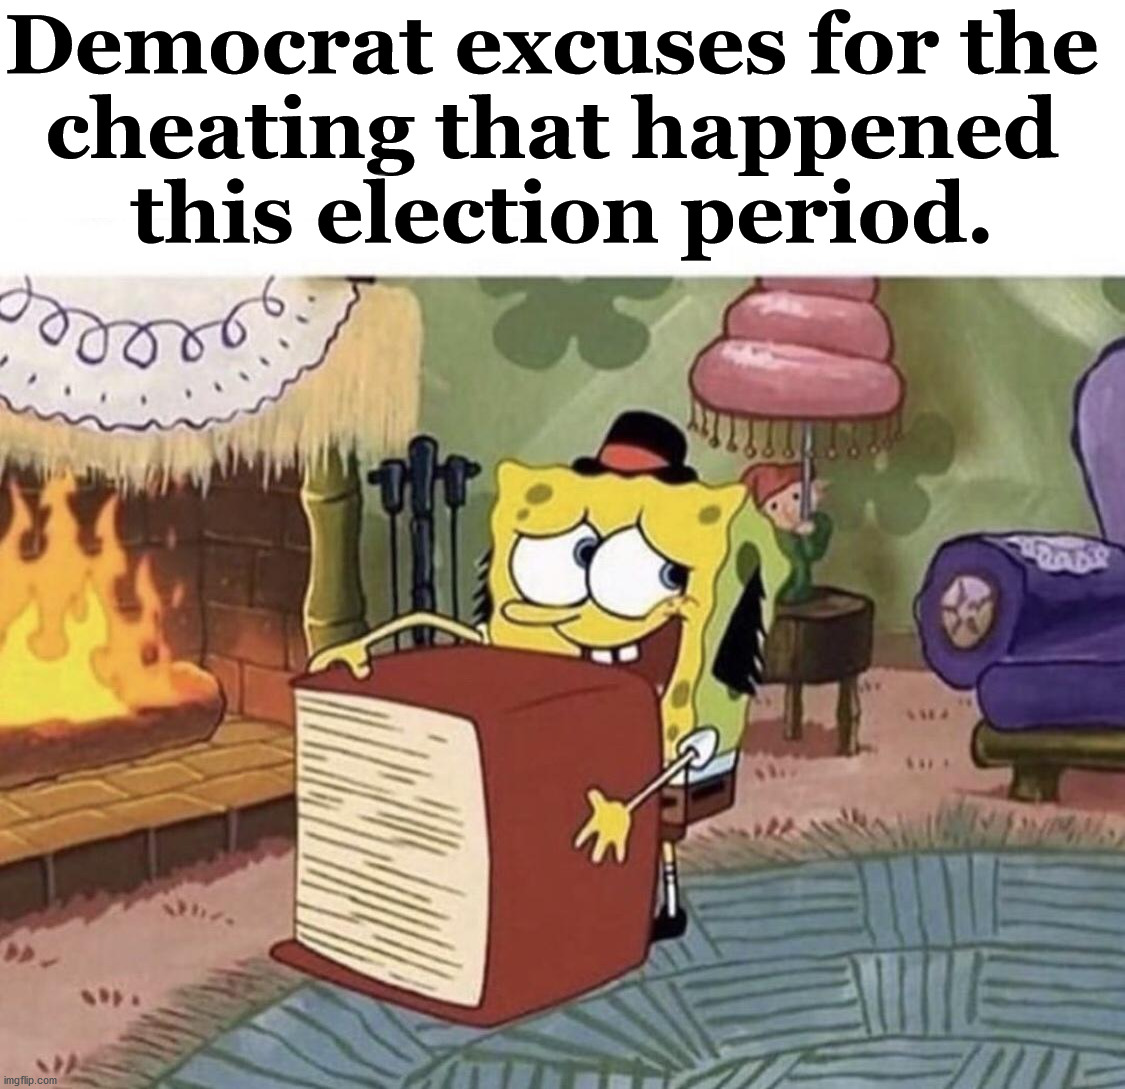 I love then saying sources when all they do is make up things or use their "science" | Democrat excuses for the 
cheating that happened 
this election period. | image tagged in excuses,democrats,cheating,political meme | made w/ Imgflip meme maker